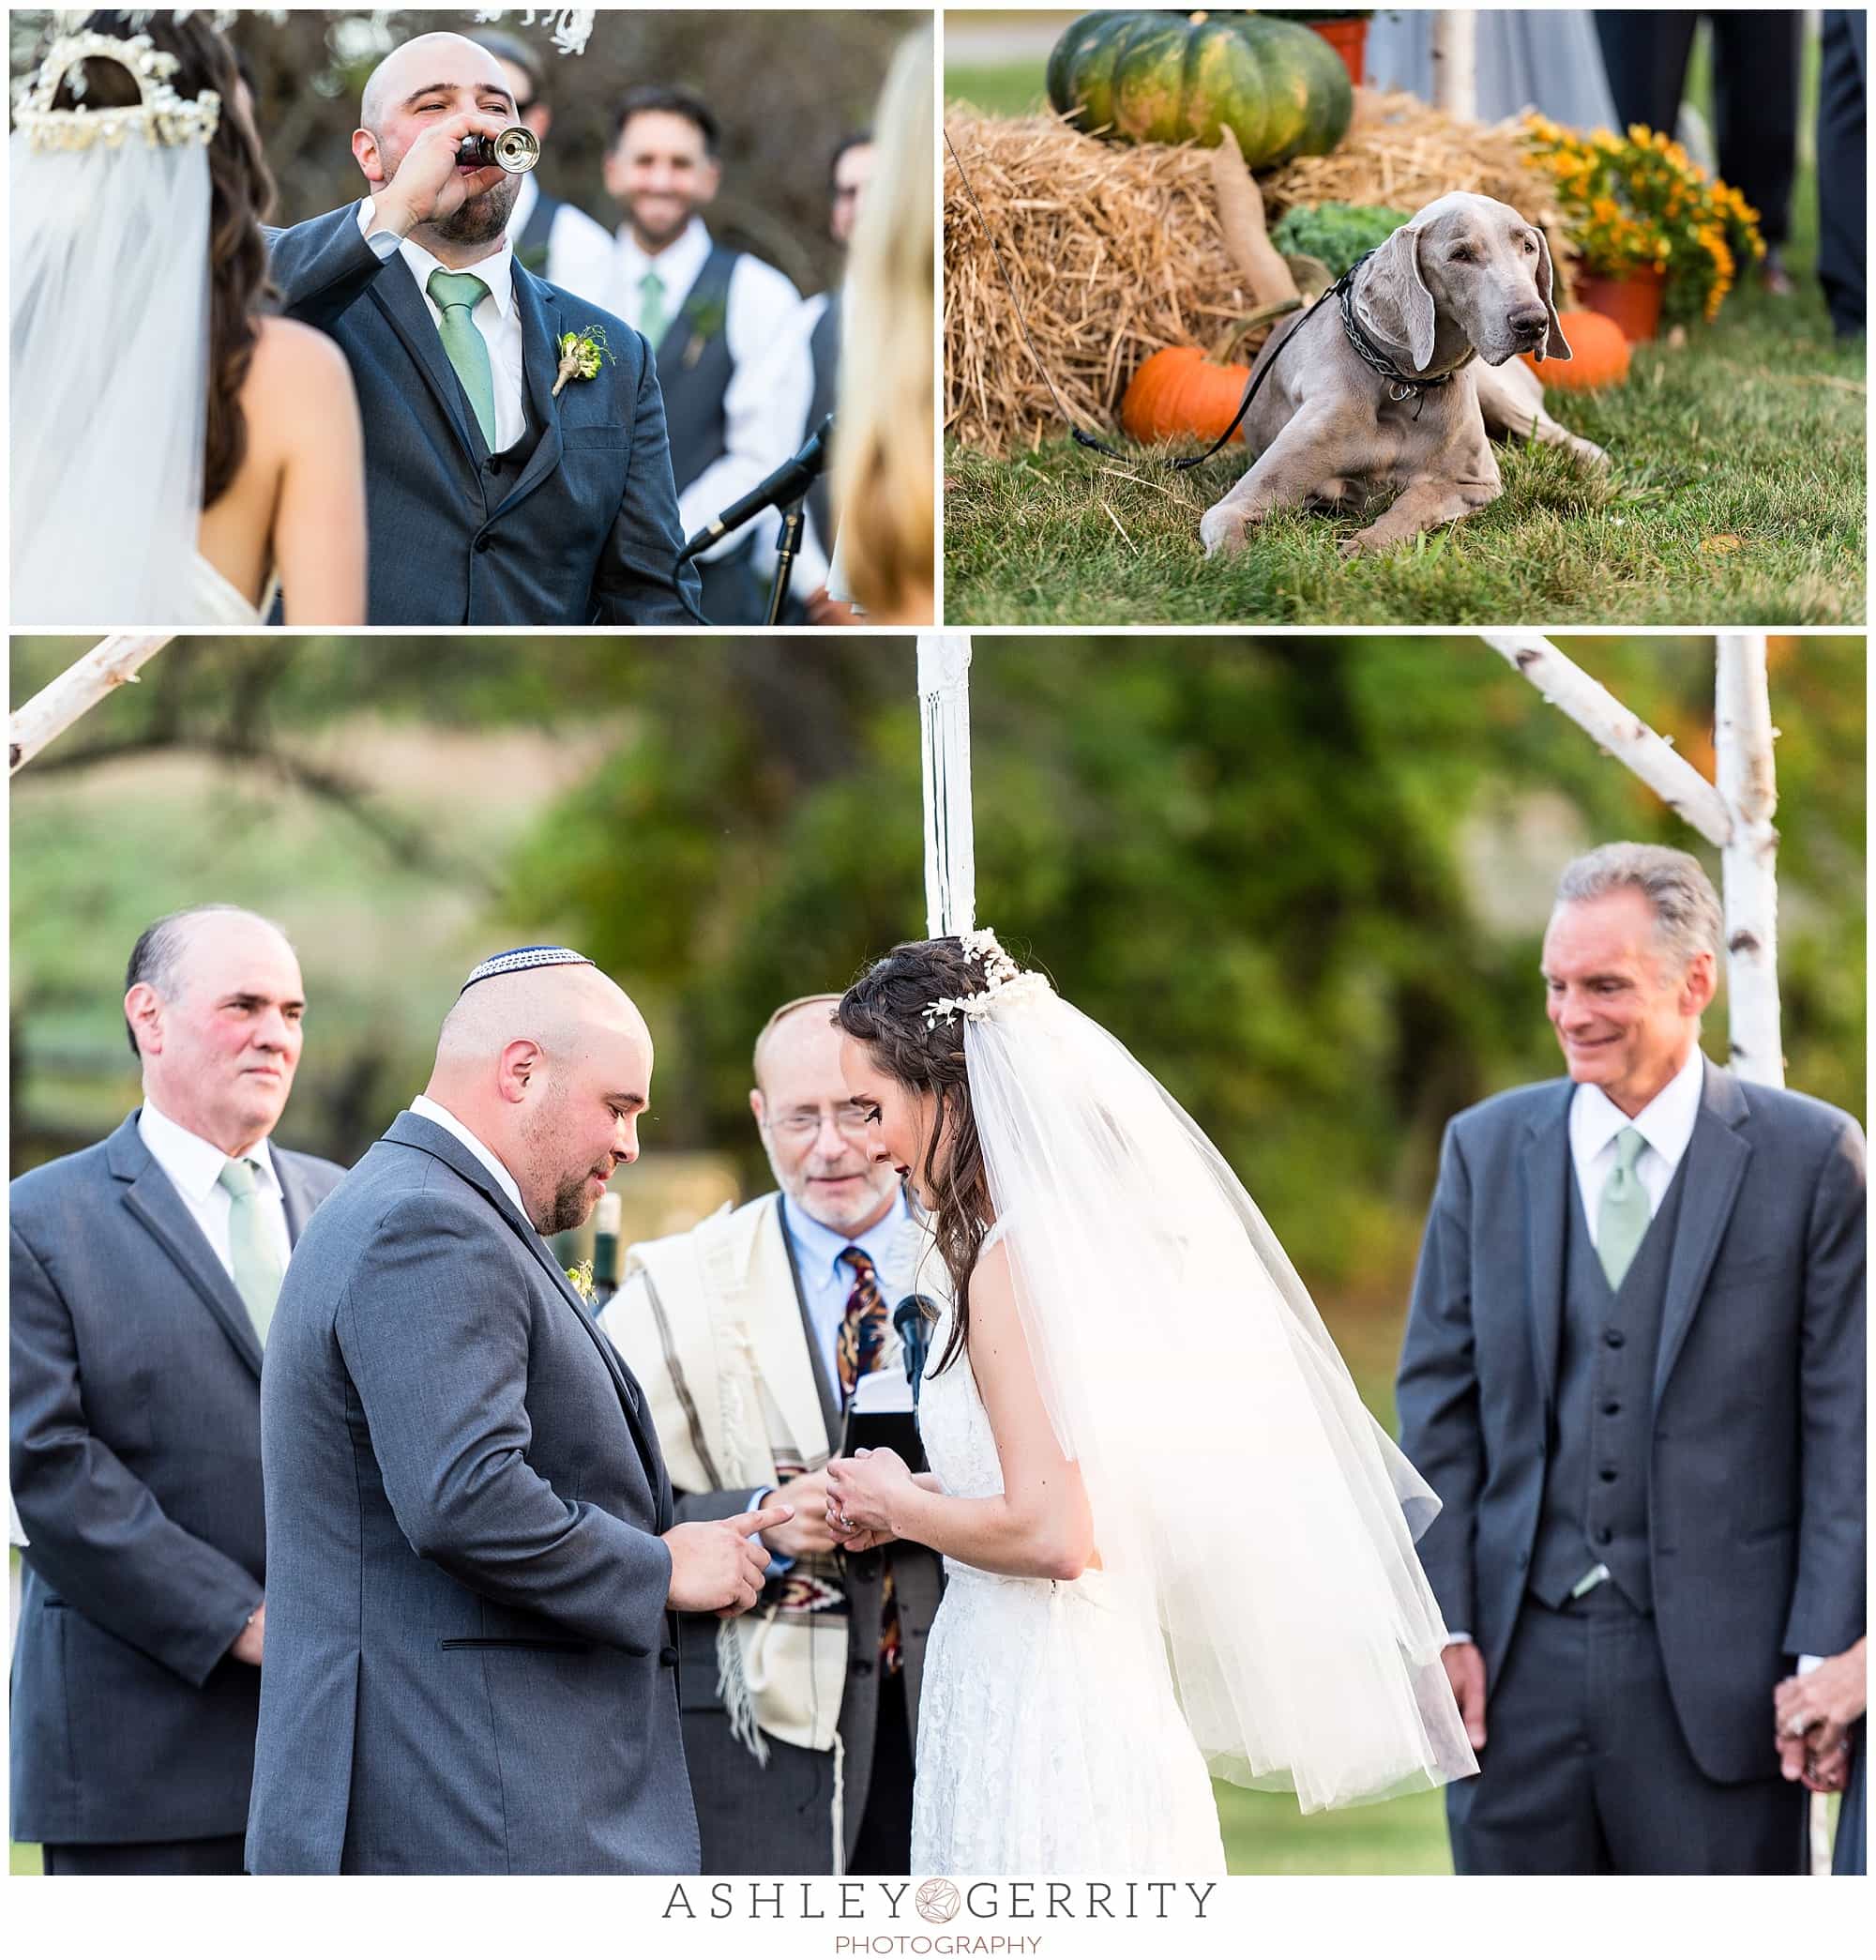 Bride & groom drink from the chalice together during their jewish ceremony before exchanging rings, carried by their family dog.